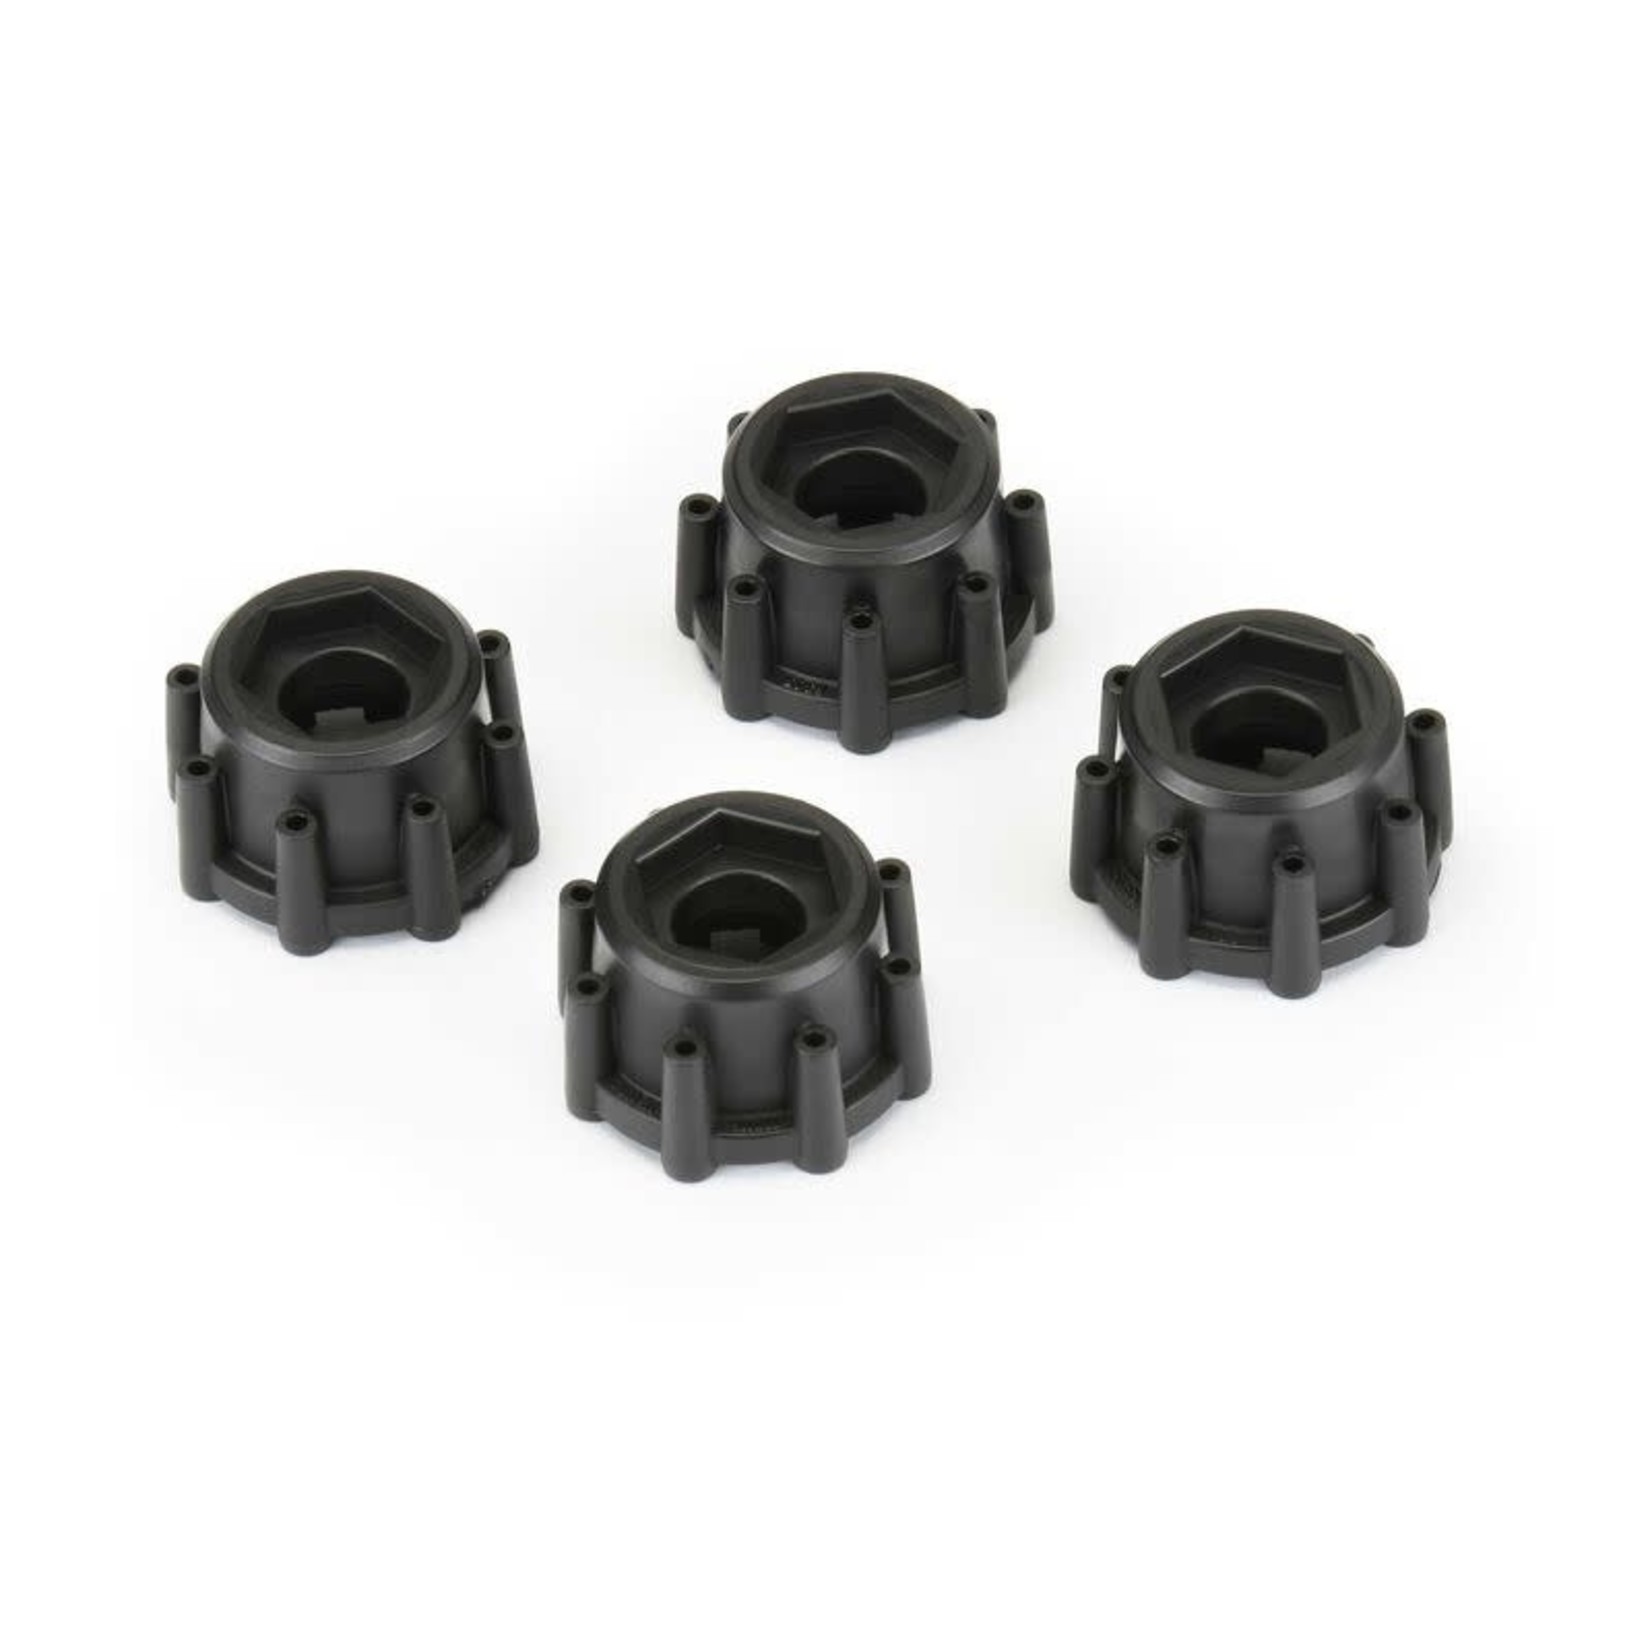 Pro-line Racing PRO634500 Pro-Line 1/8 8x32 to 17mm 1/2" Offset Hex Adapters